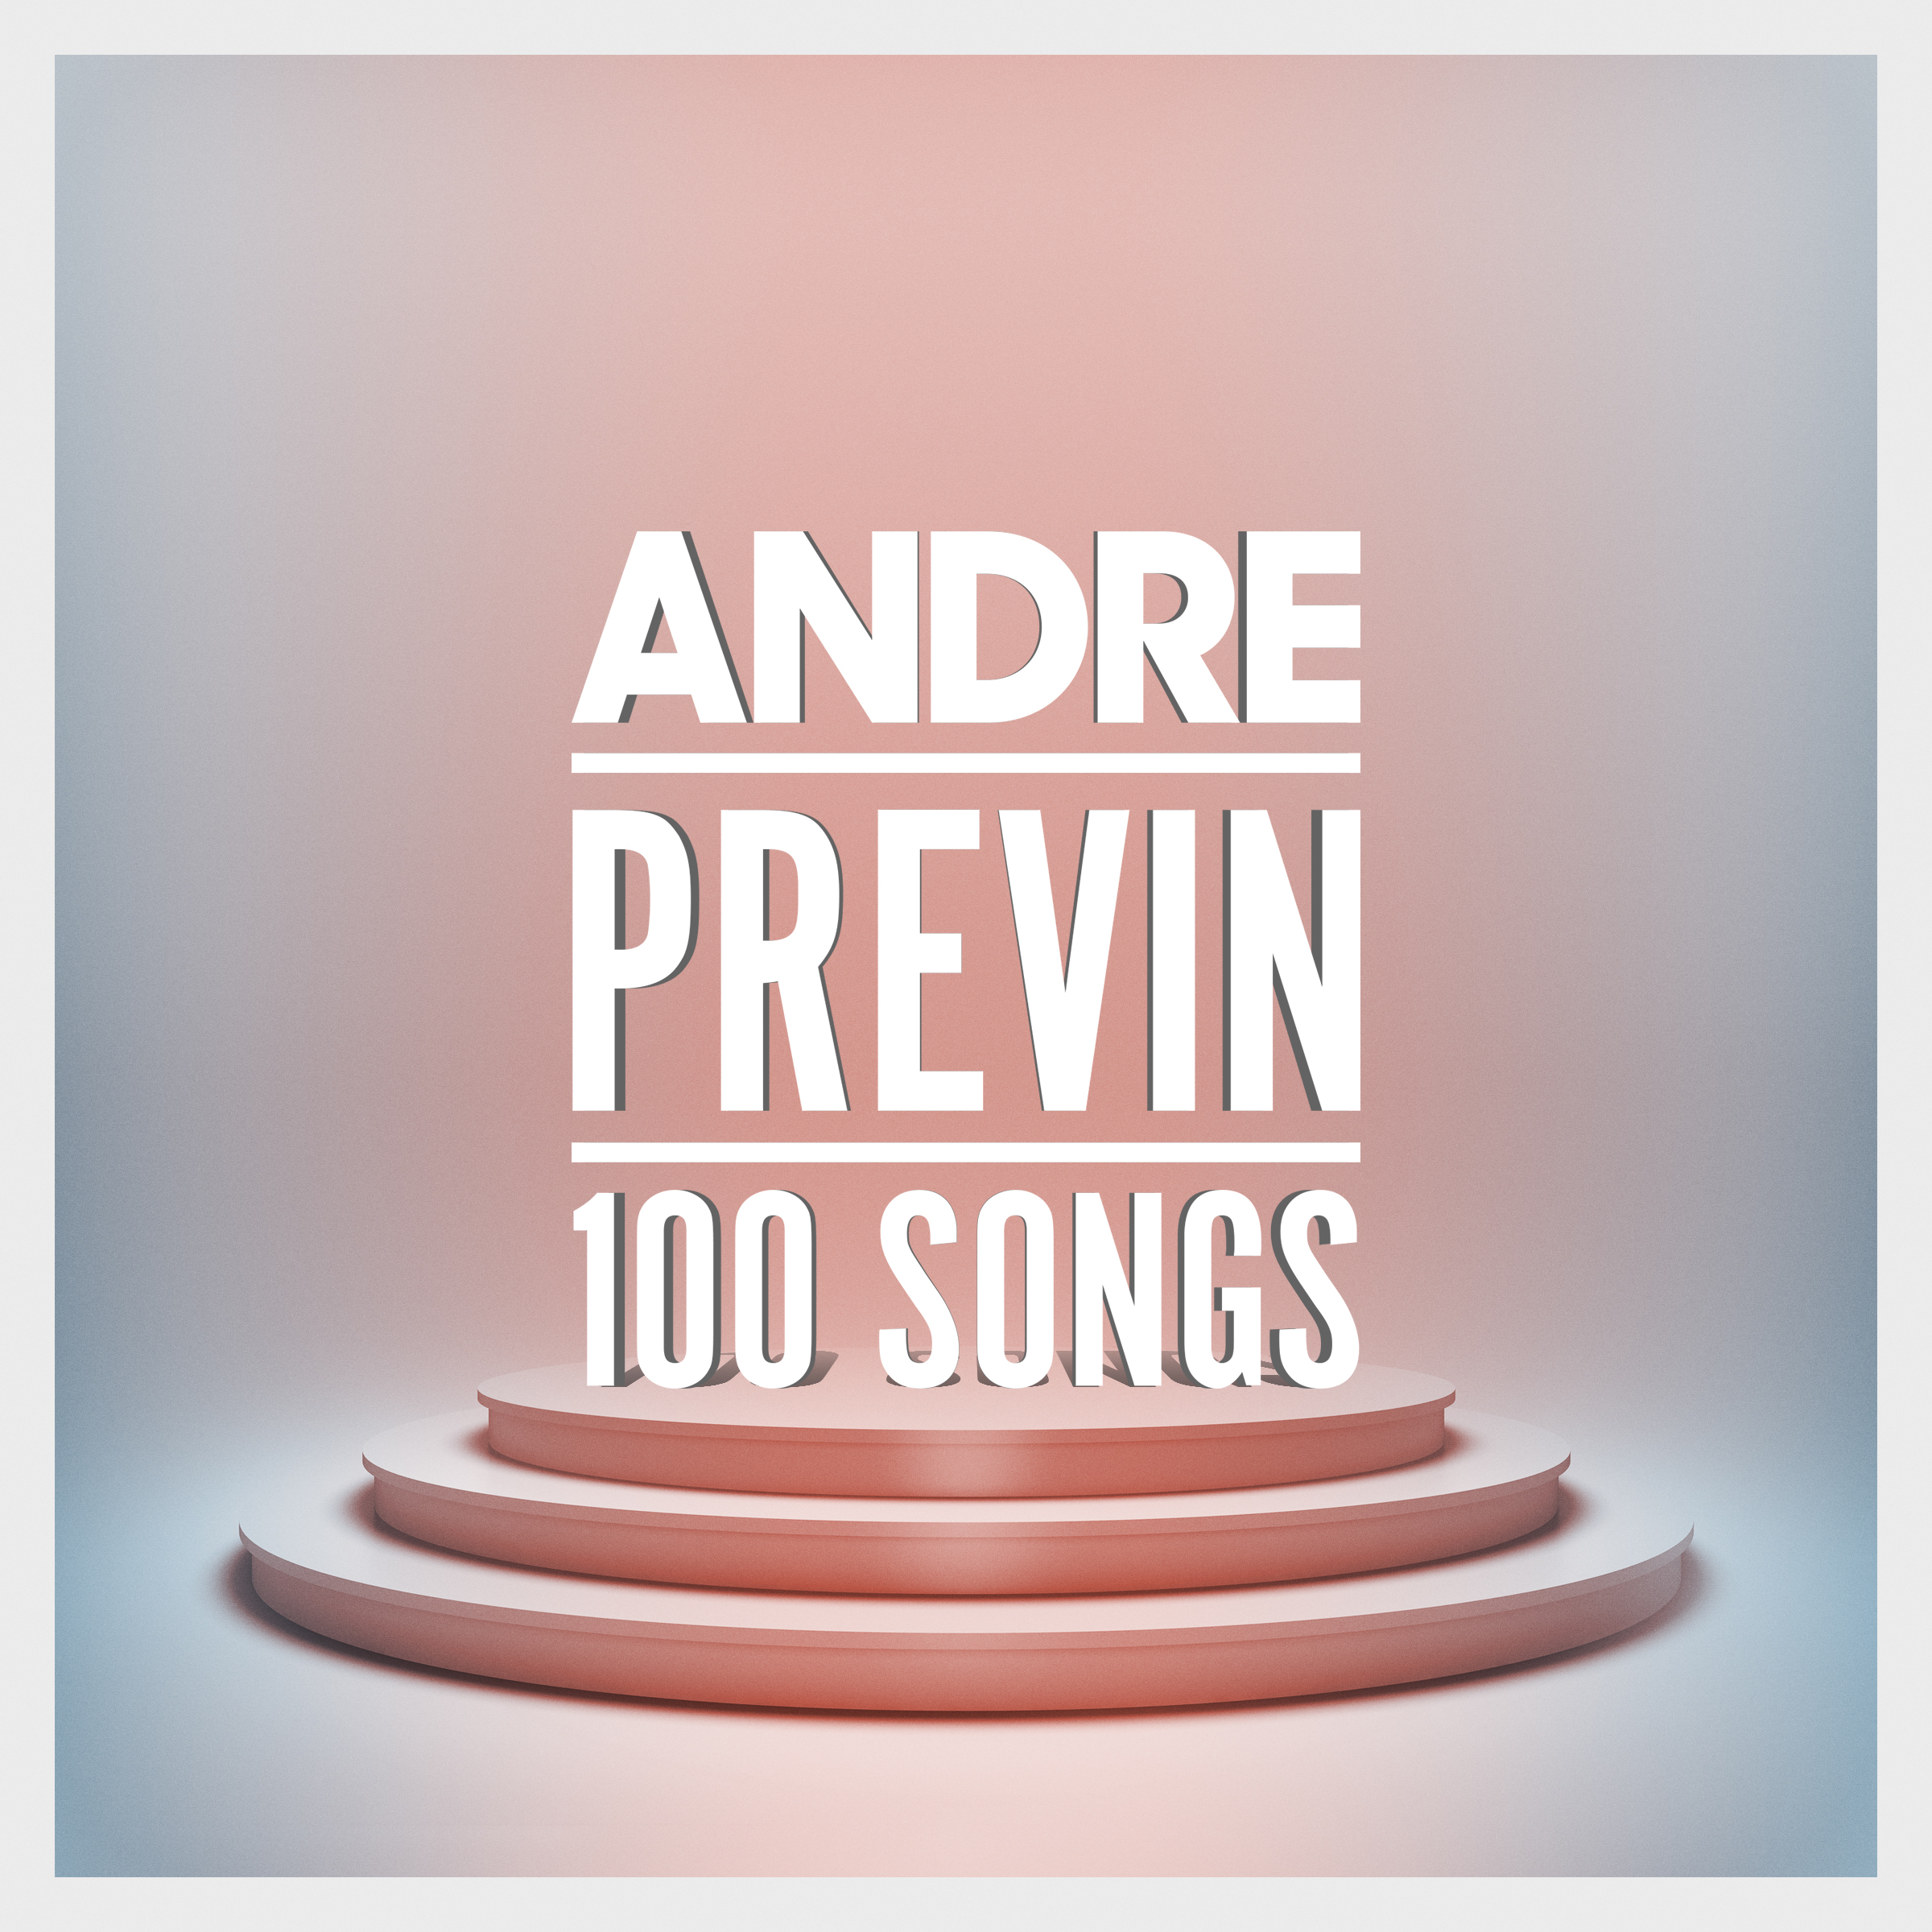 Andre Previn - 100 Songs